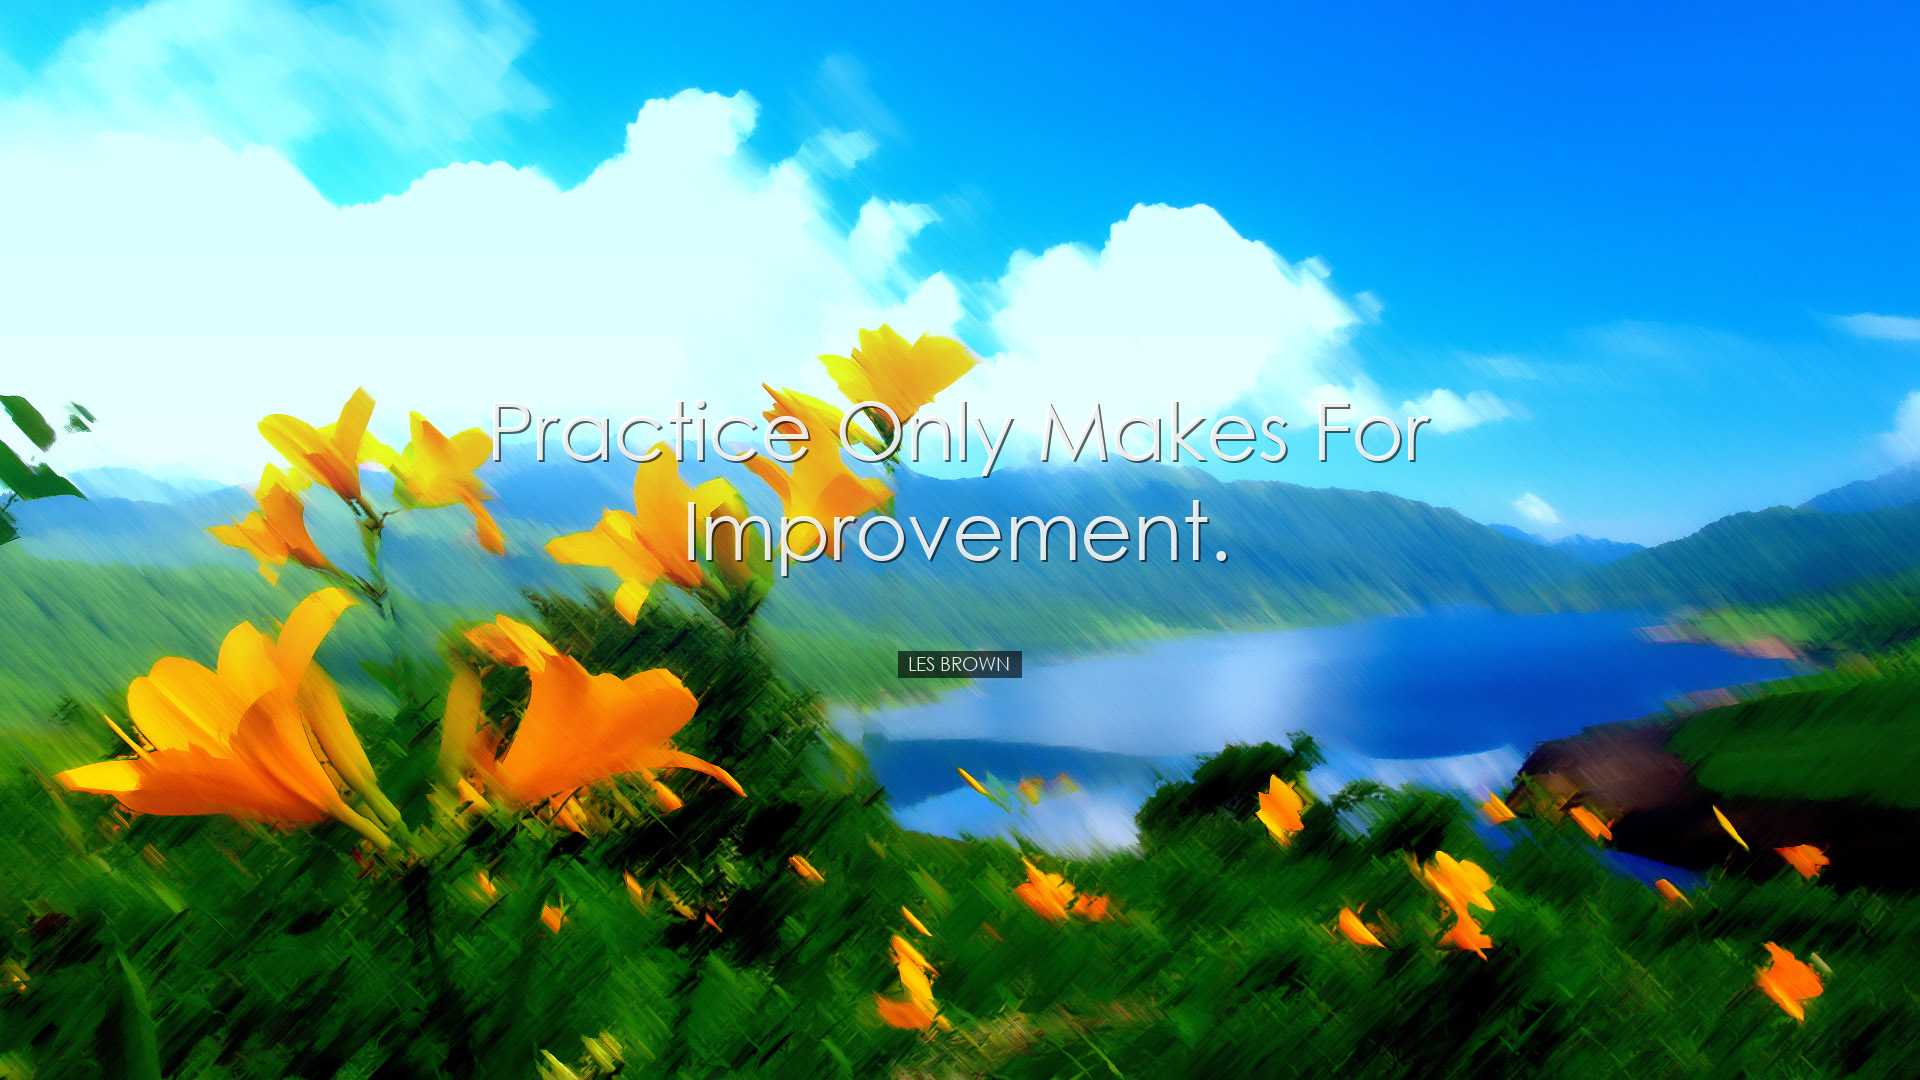 Practice only makes for improvement. - Les Brown